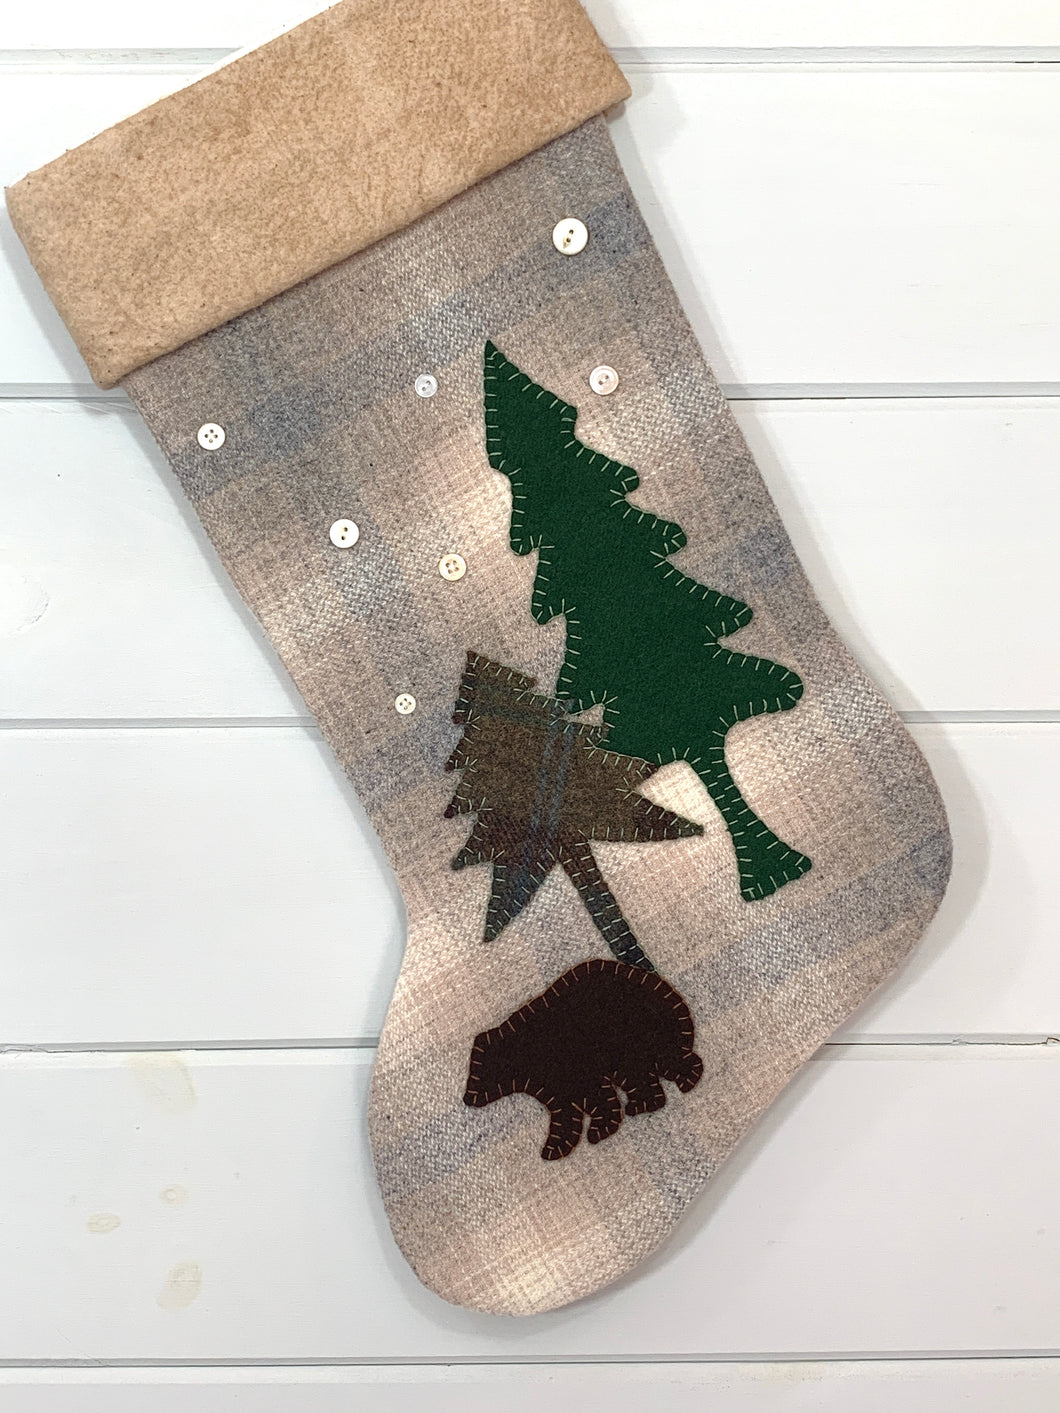 bear Christmas stocking, cream, tan, light blue plaid wool fabric Christmas stocking, brown bear is brown wool fabric, tall pine tree is green wool fabric, short pine tree is green plaid wool fabric, trees and bear are hand stitched to stocking, seven white vintage buttons sewn onto stocking for snowflakes, cuff is tea dyed cotton batting, woodland brown bear Christmas stocking, rustic bear Christmas stocking, large stocking